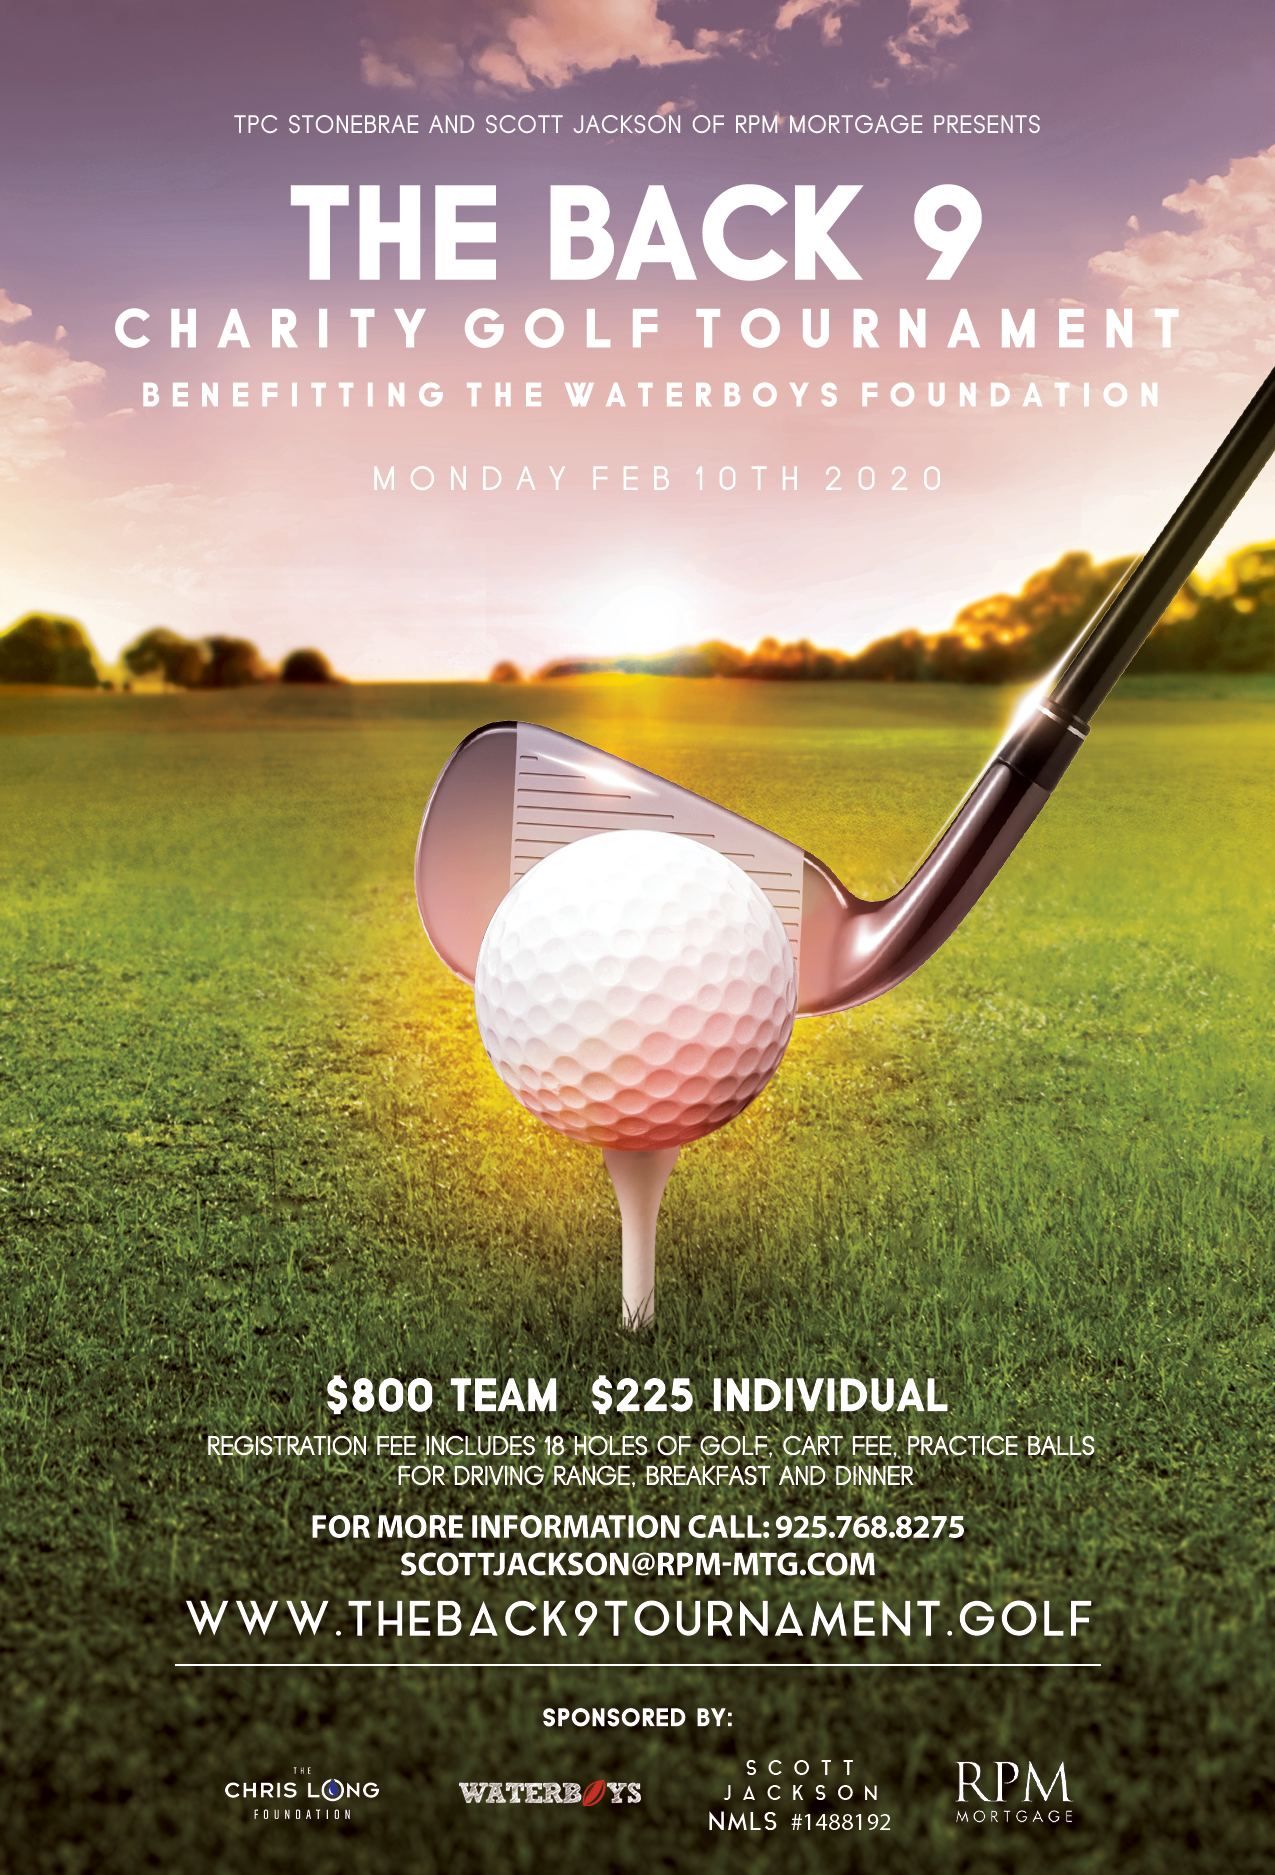 The Back 9 Charity Golf Tournament